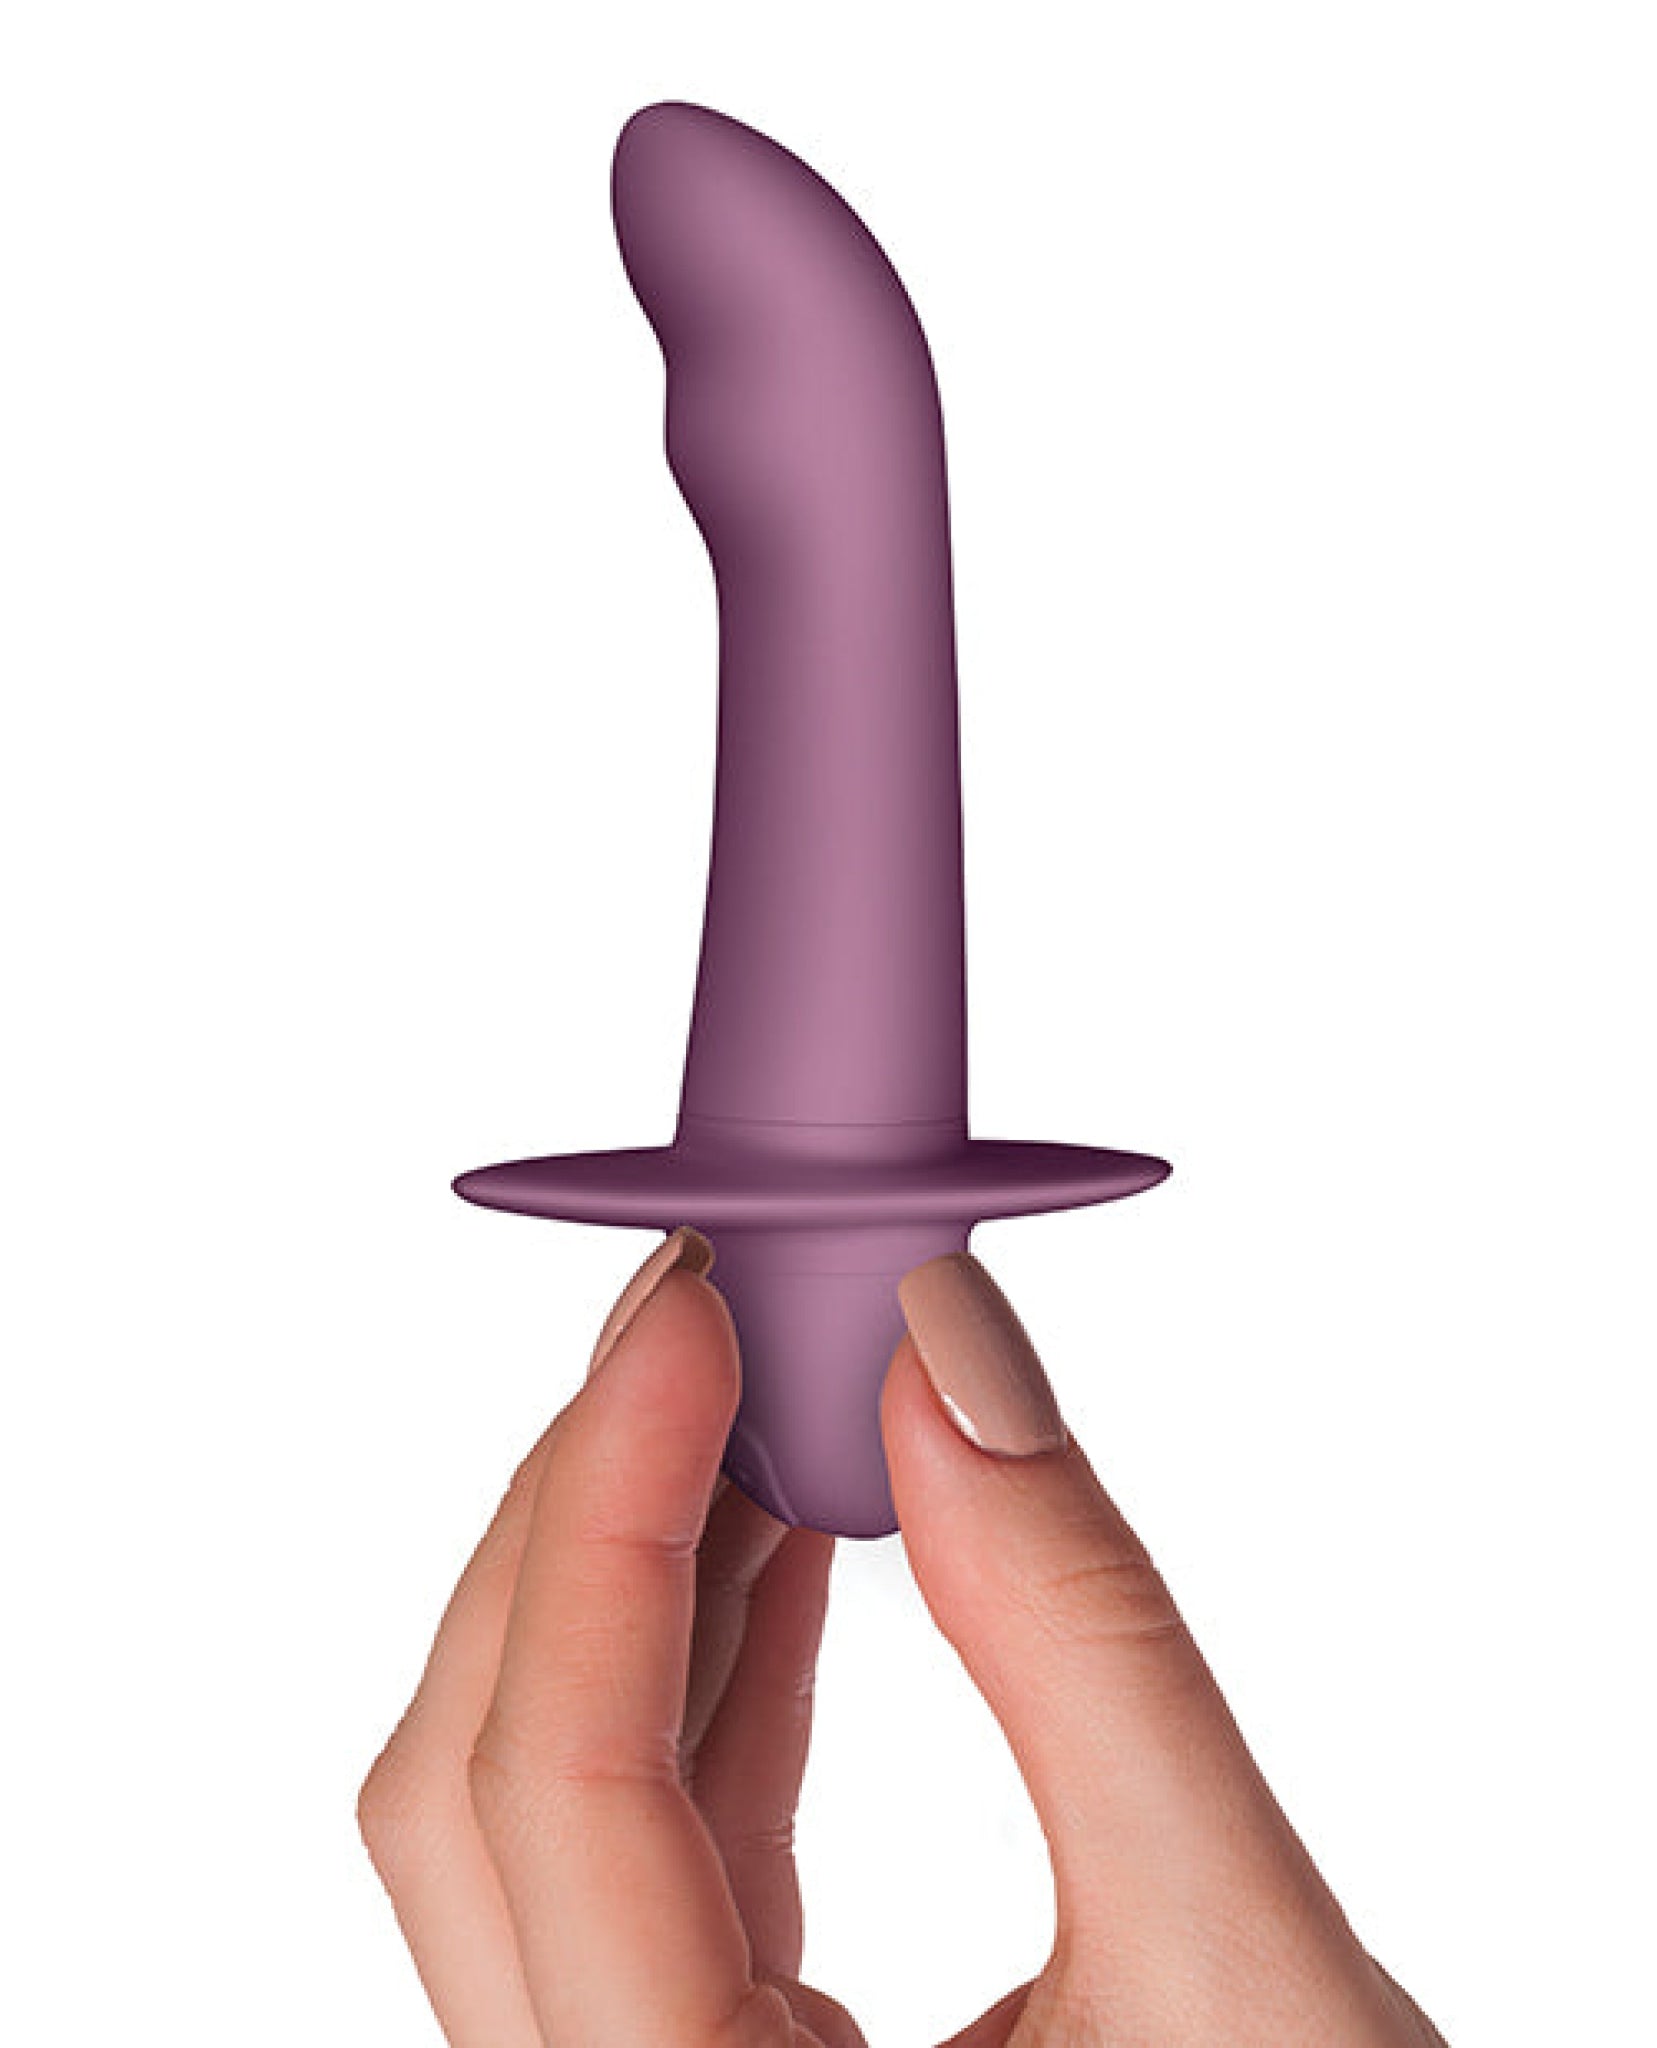 Sugarboo Tickety Boo Vibrating Prostate Bullet - Mauve Rocks-off